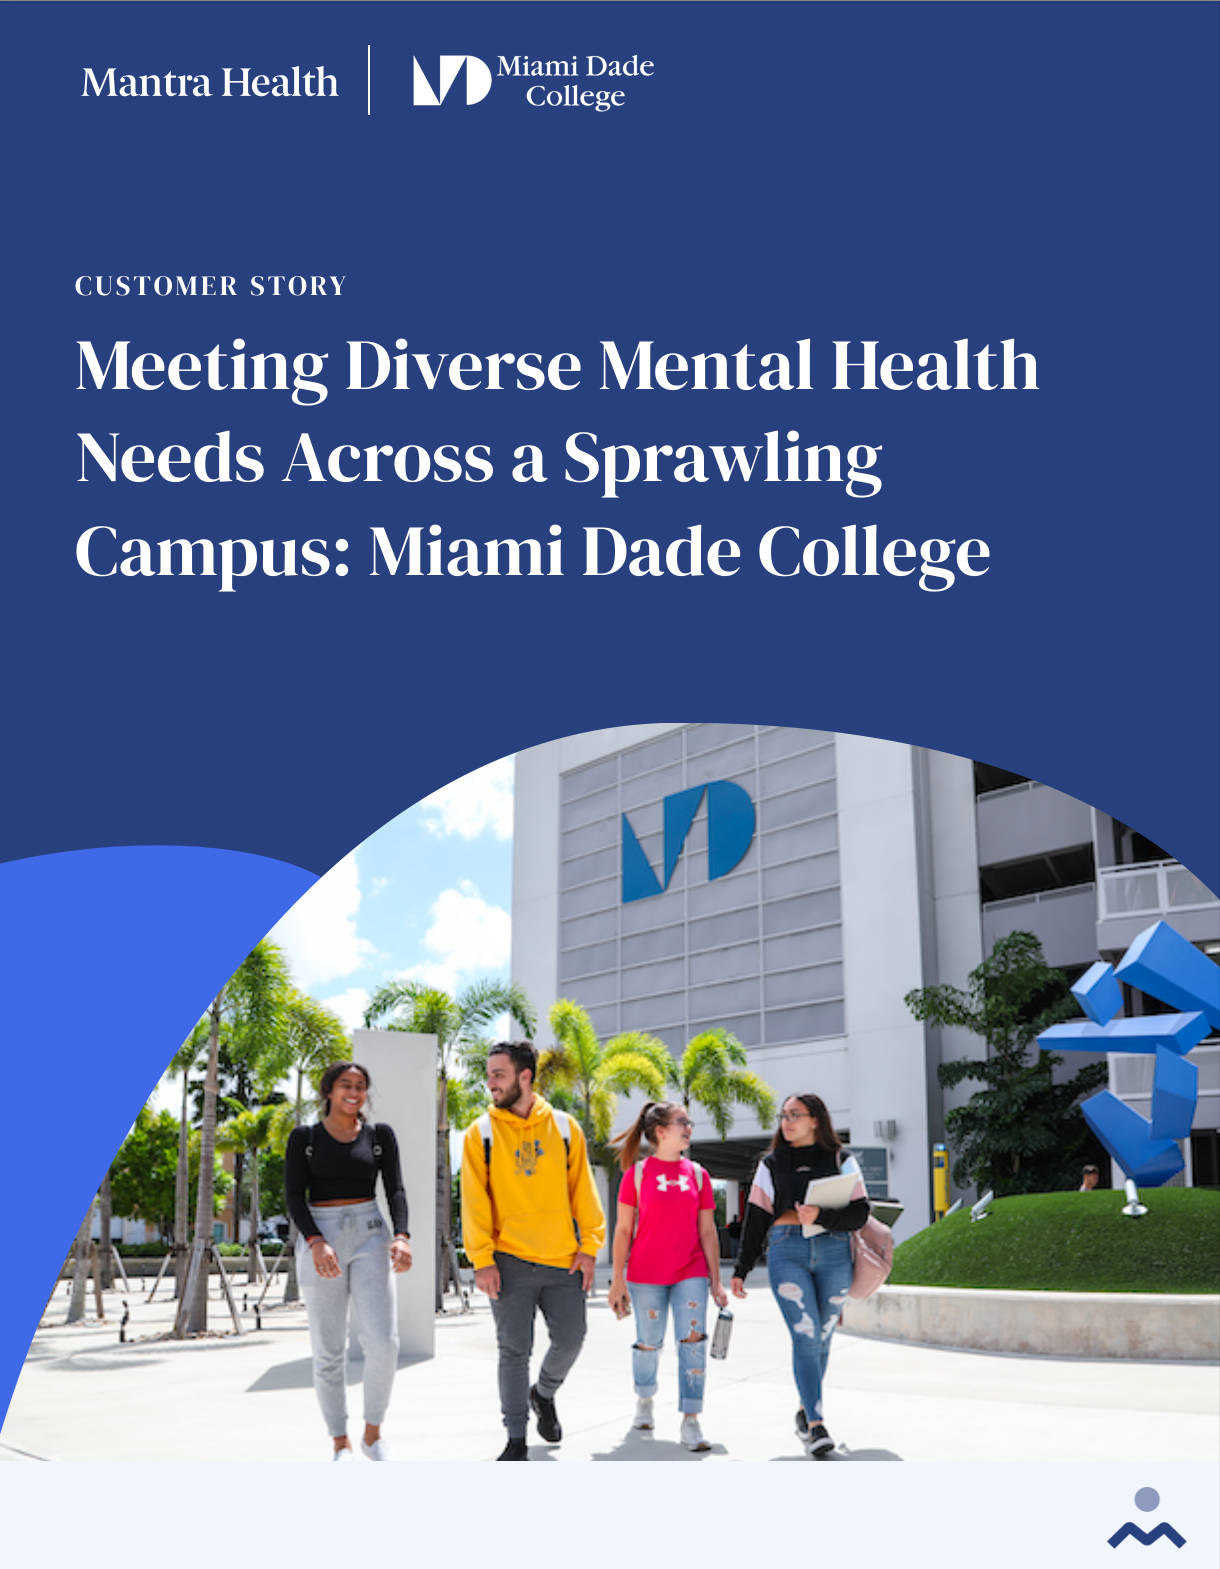 Mantra Health and Miami Dade College